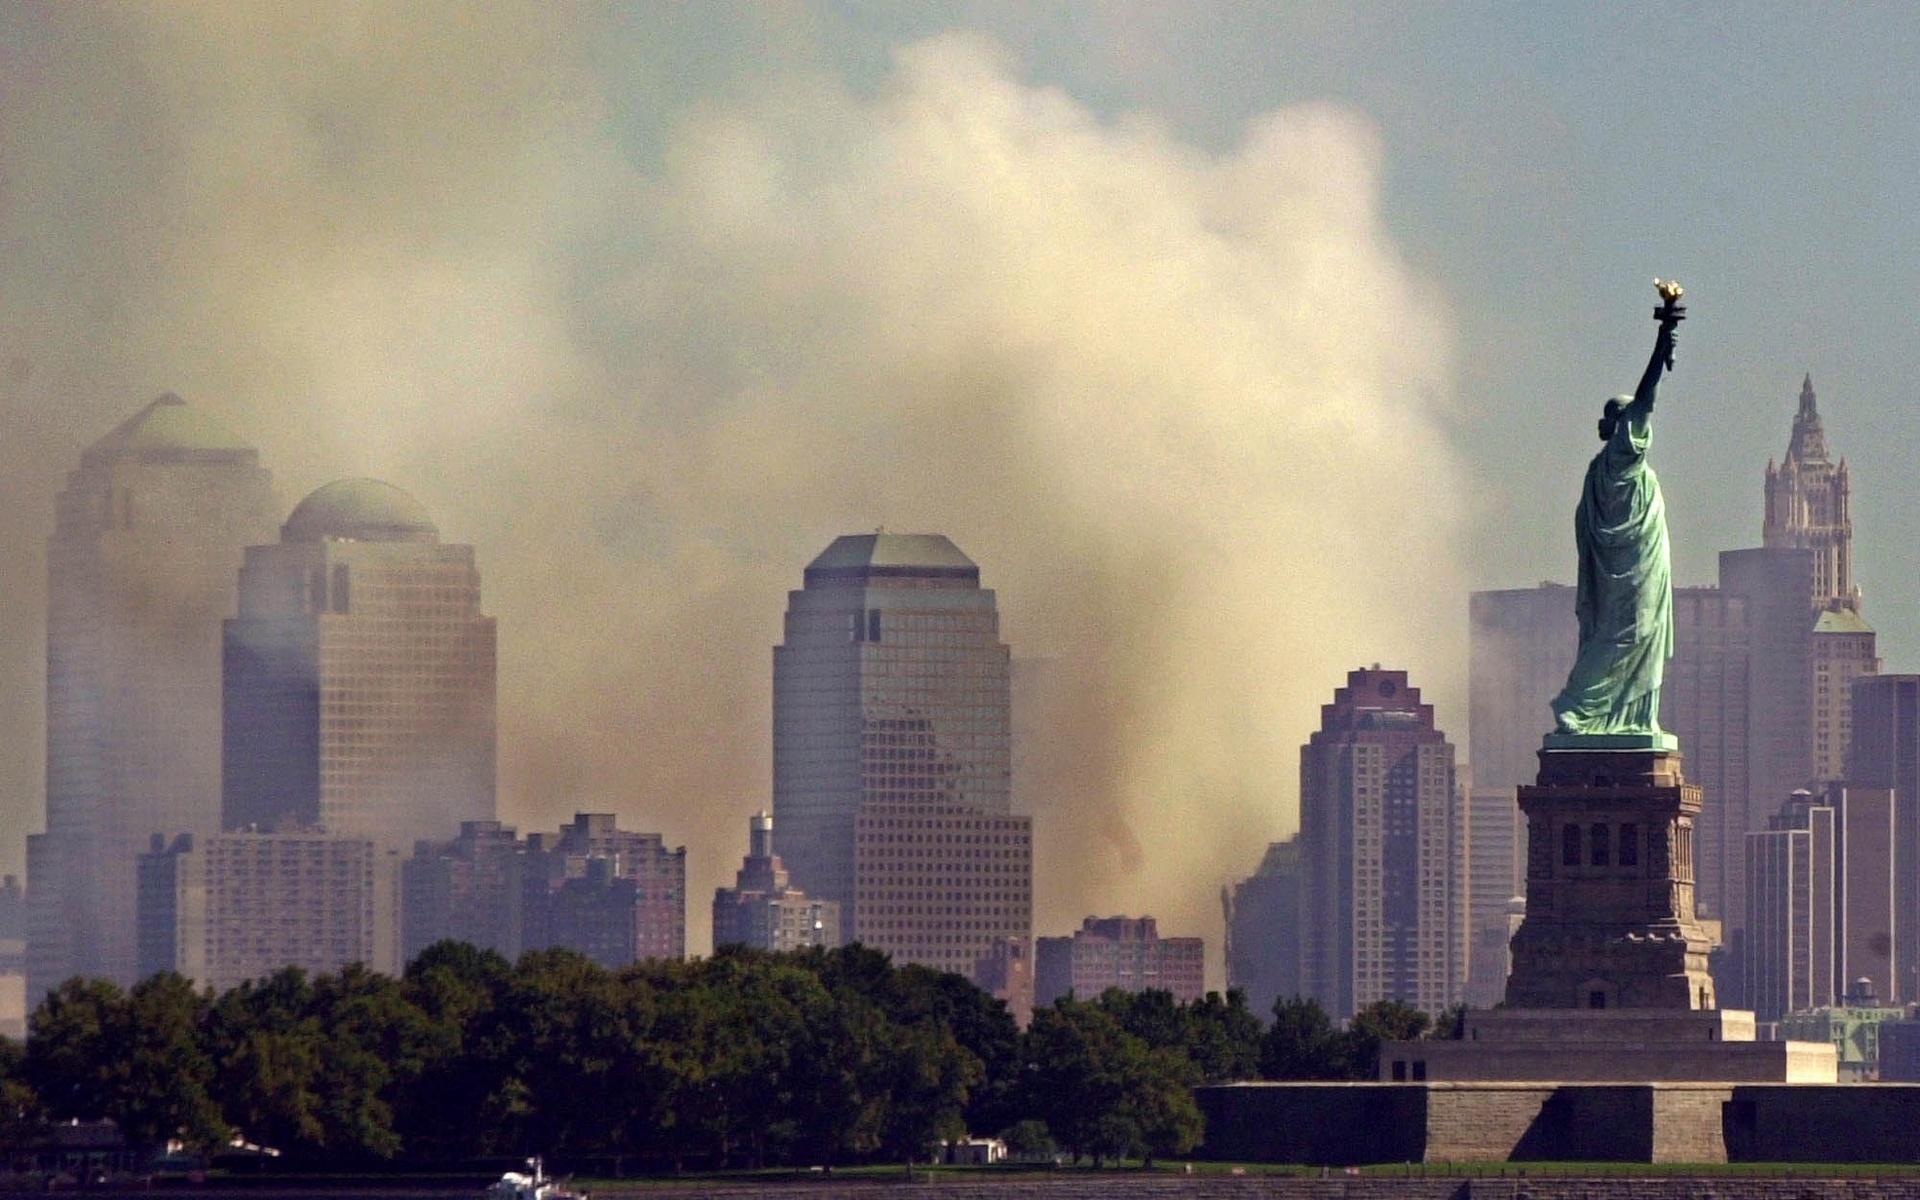 With the Statue of Liberty standing in New York Harbor, smoke rises from lower Manhattan following the destruction of buildings at the World Trade Center in New York, Wednesday Sept. 12, 2001.  Two hijacked commercial aircraft crashed into the center&apos;s towers. (AP Photo/Charles Krupa)